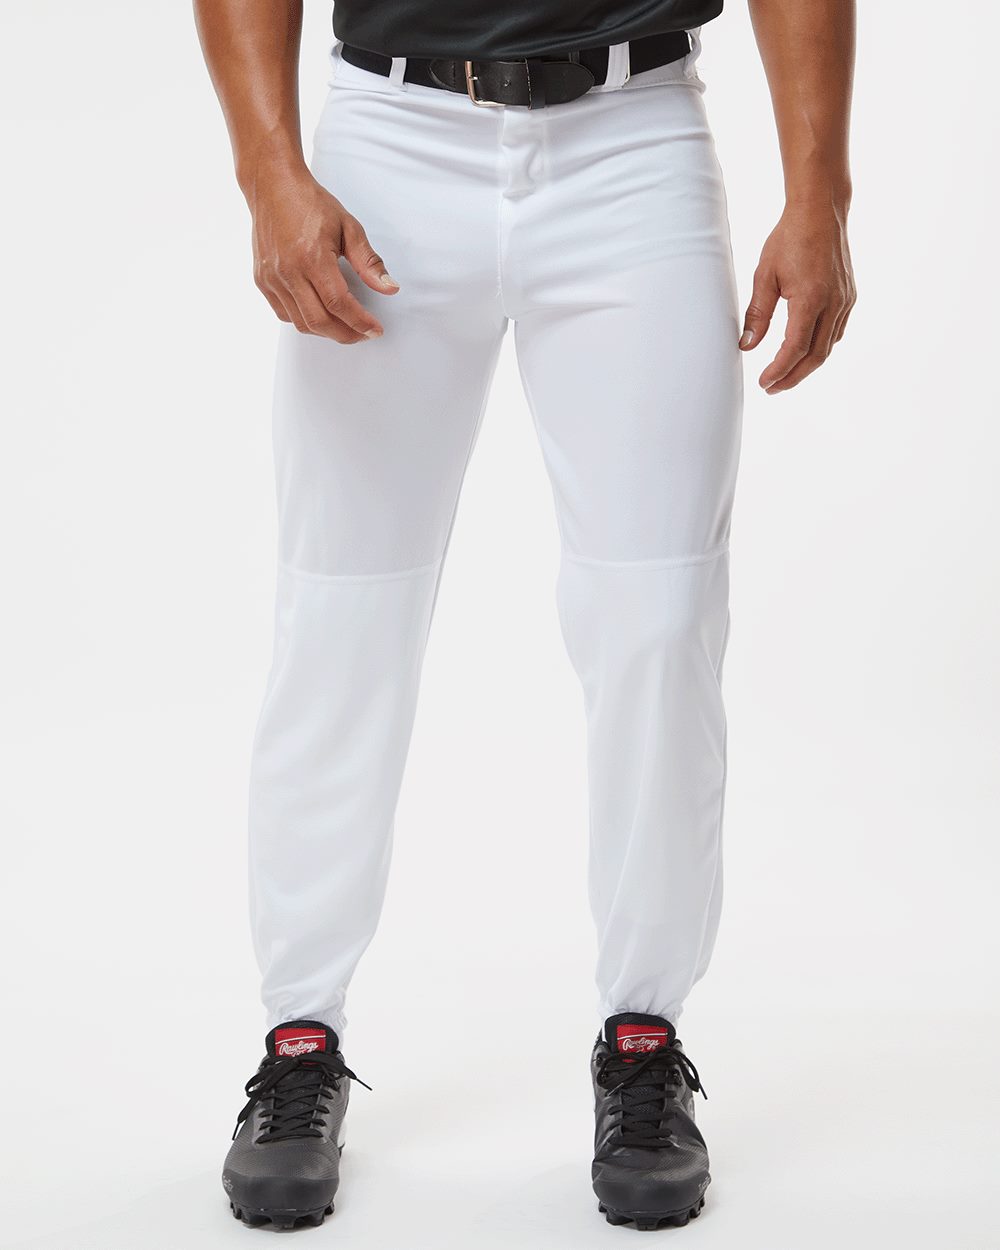 605WPN ALLESON ATHLETIC Mens Pinstripe Relaxed Fit Baseball Pants 